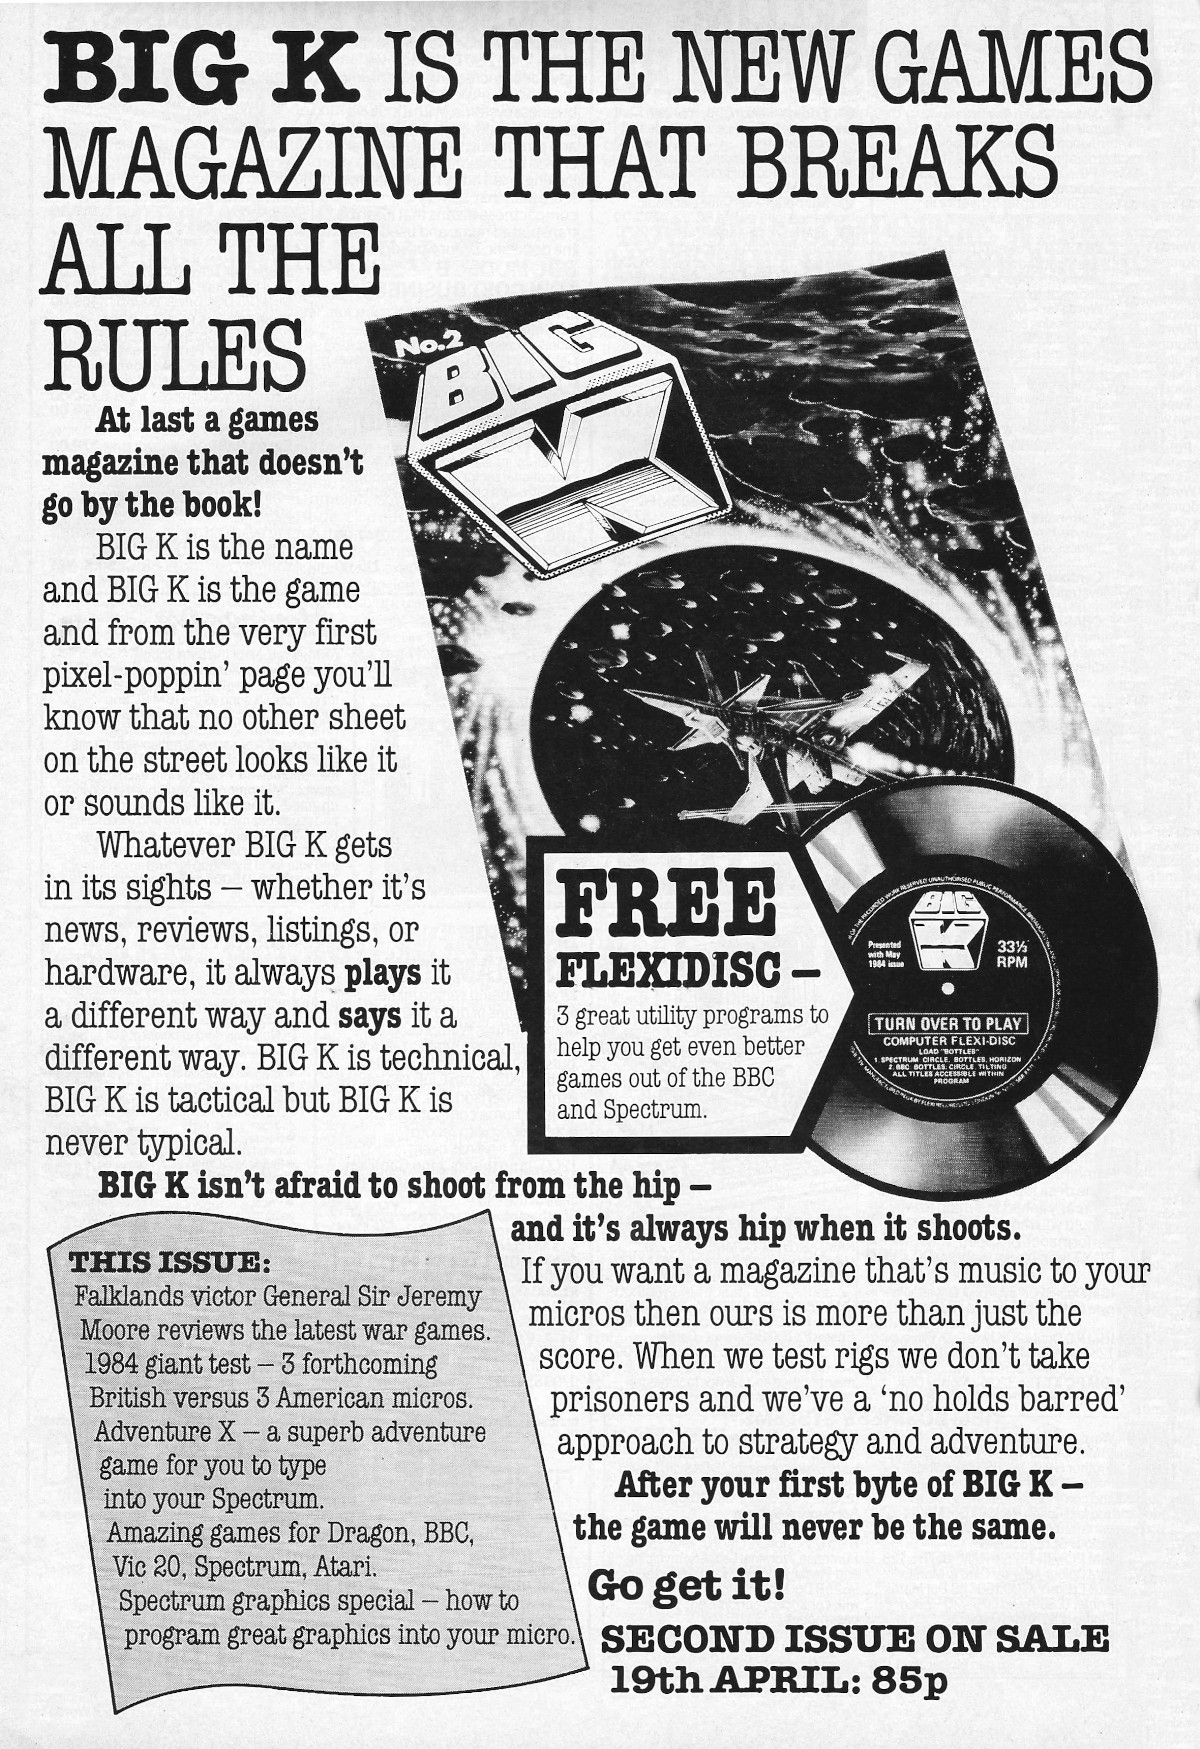 A <span class='hilite'>flexidisc</span> offered as part of the number 2 issue of Big K - the games magazine that 